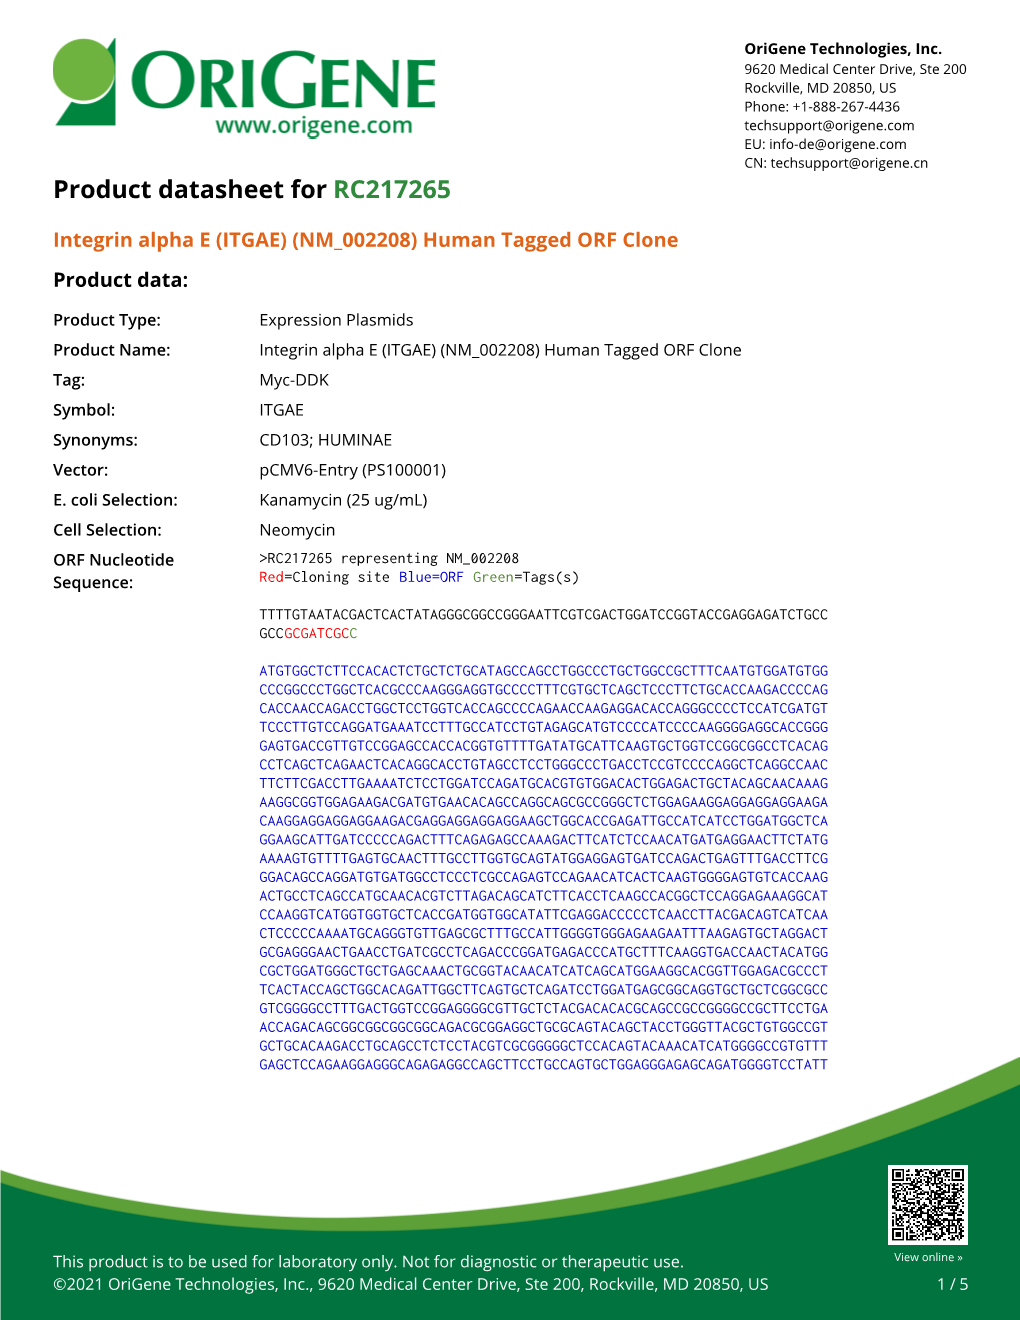 (ITGAE) (NM 002208) Human Tagged ORF Clone Product Data